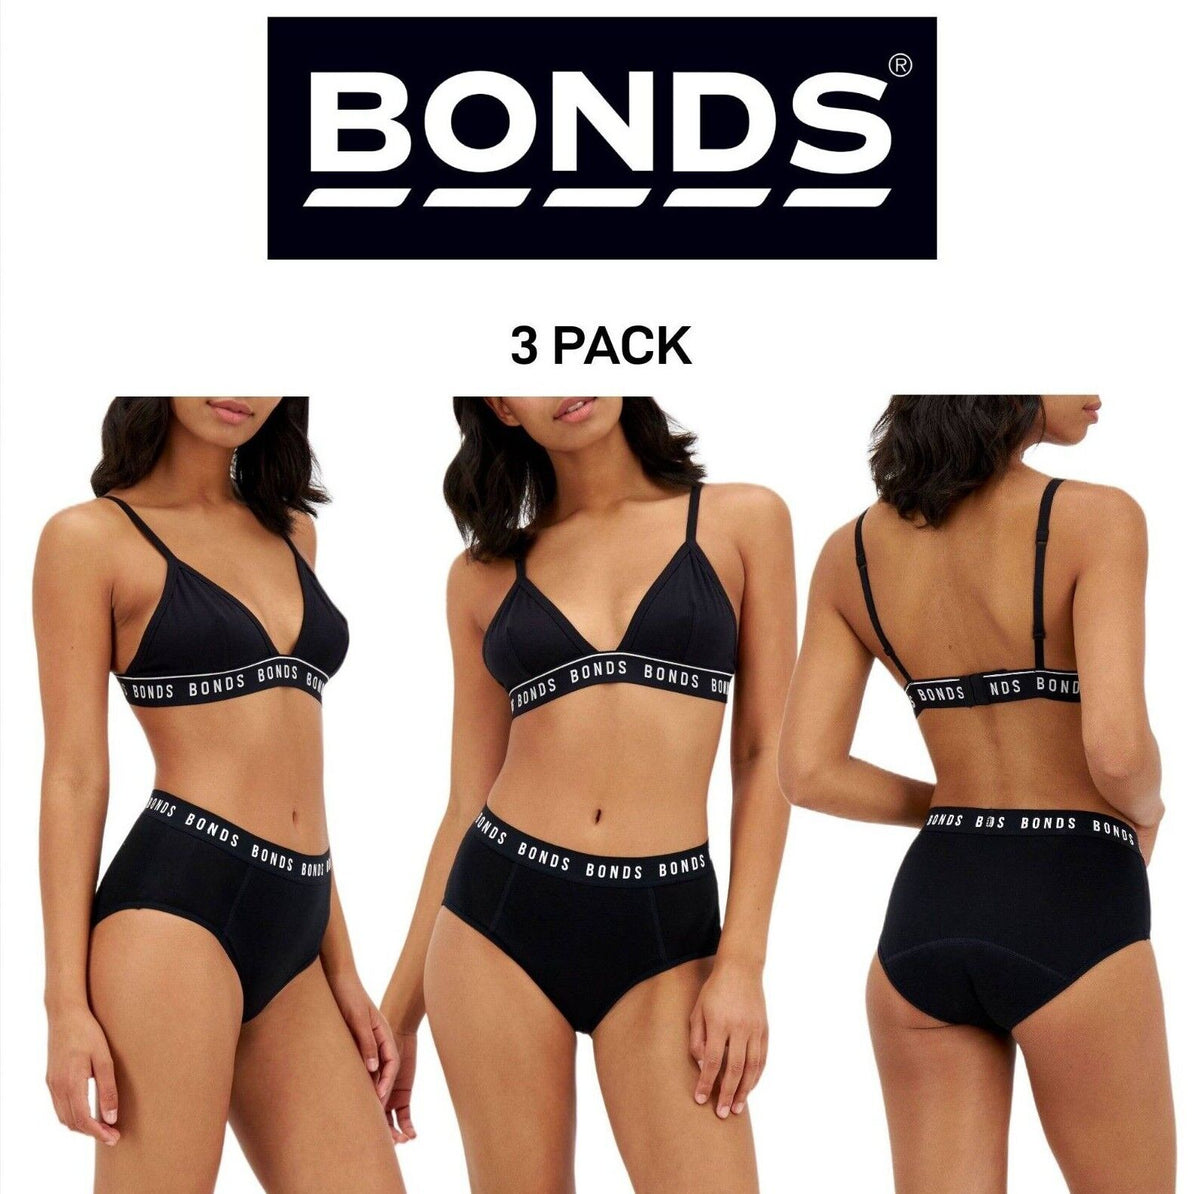 Bonds Womens Bloody Comfy Period Full Brief Moderate Comfy Undies 3 Pack WTKL